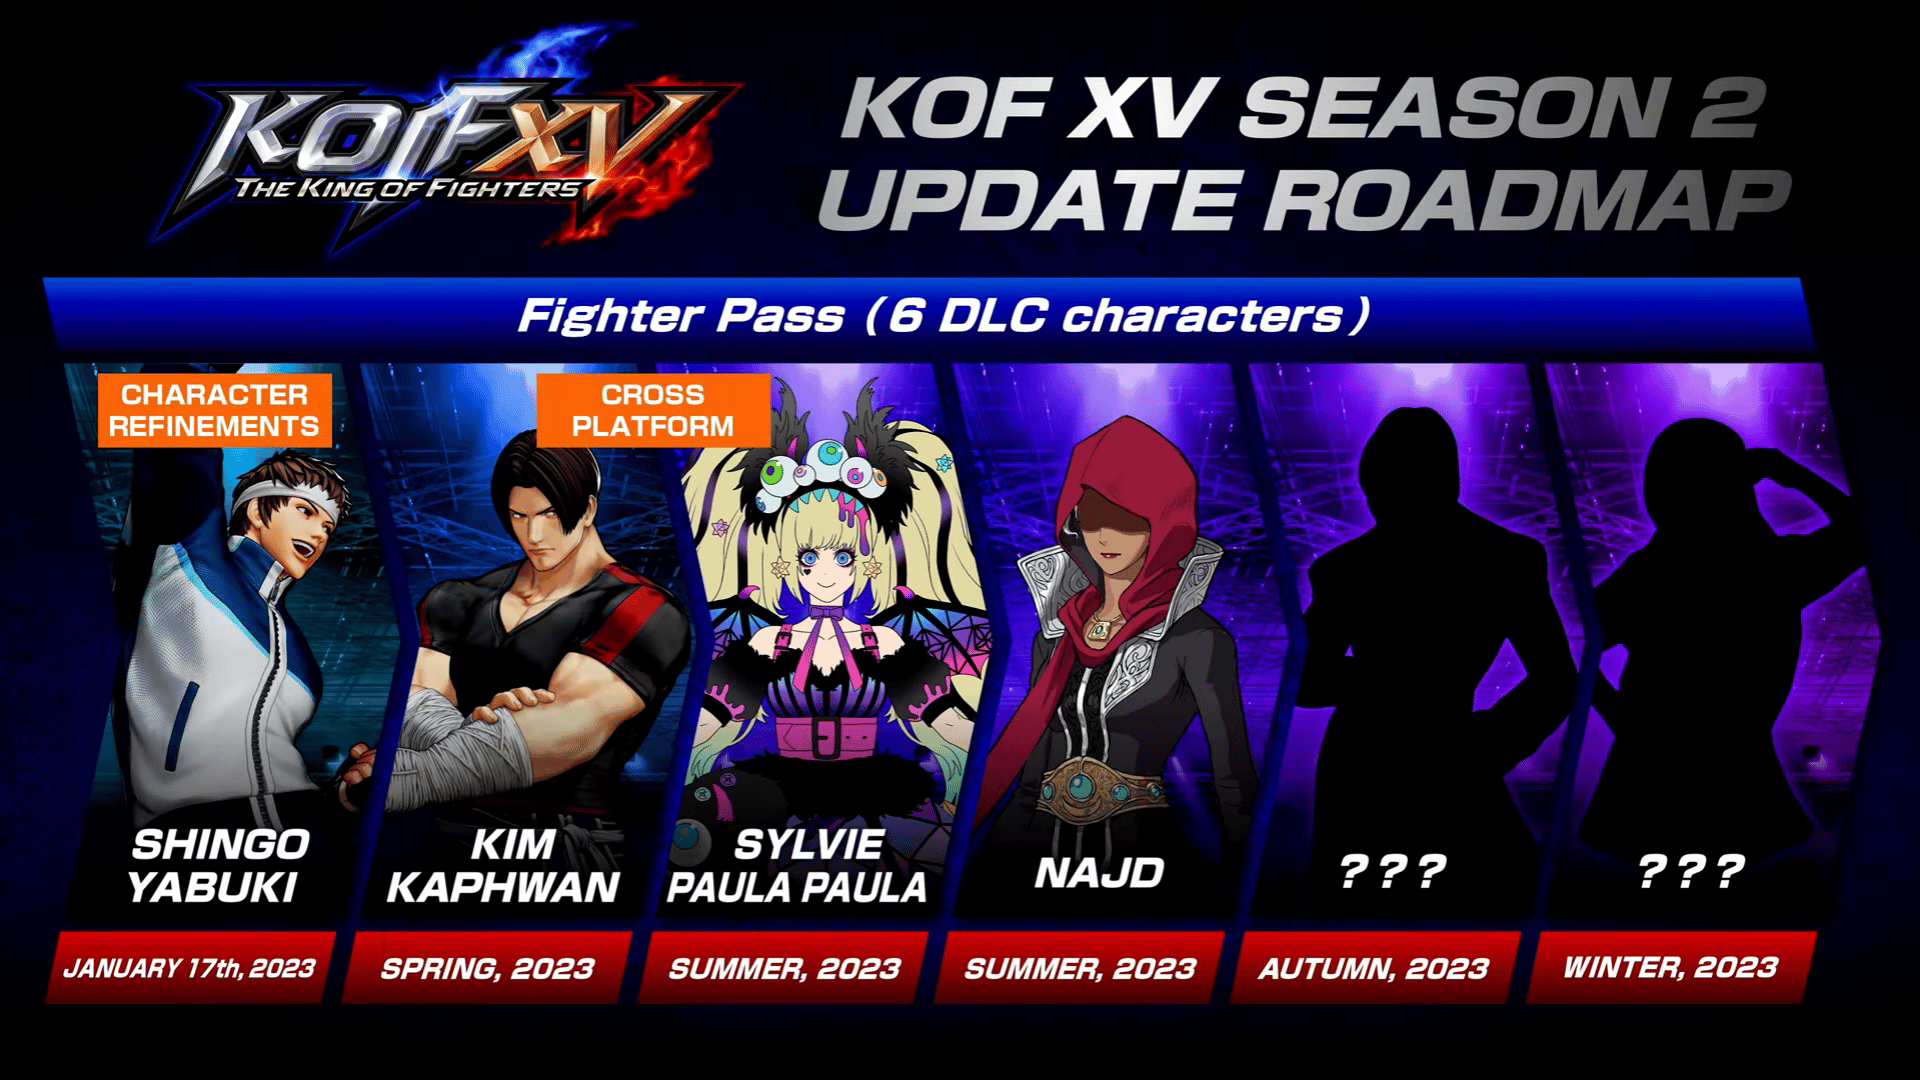 The King of Fighters XV Season 2, Character Refinement Patch & Shingo Yabuki Joining Next Week; 5 More Characters Teased